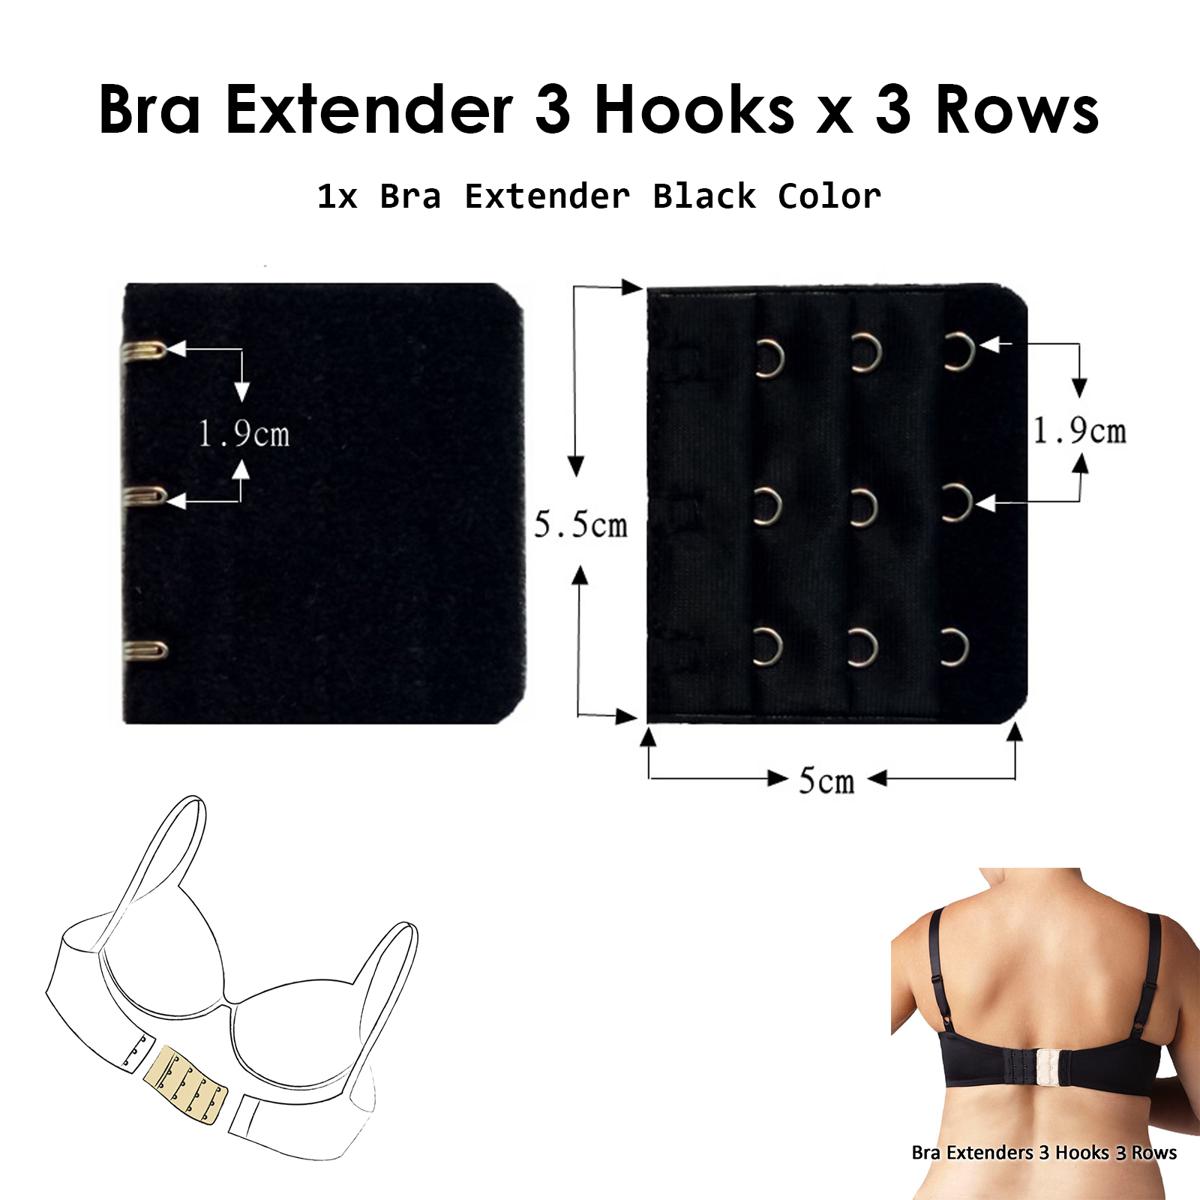 1x Black And Skin Bra Extenders 3 Hooks 3 Rows - Add 0.5 to 2.5 Inches To  The Back Of Your Bras For Women